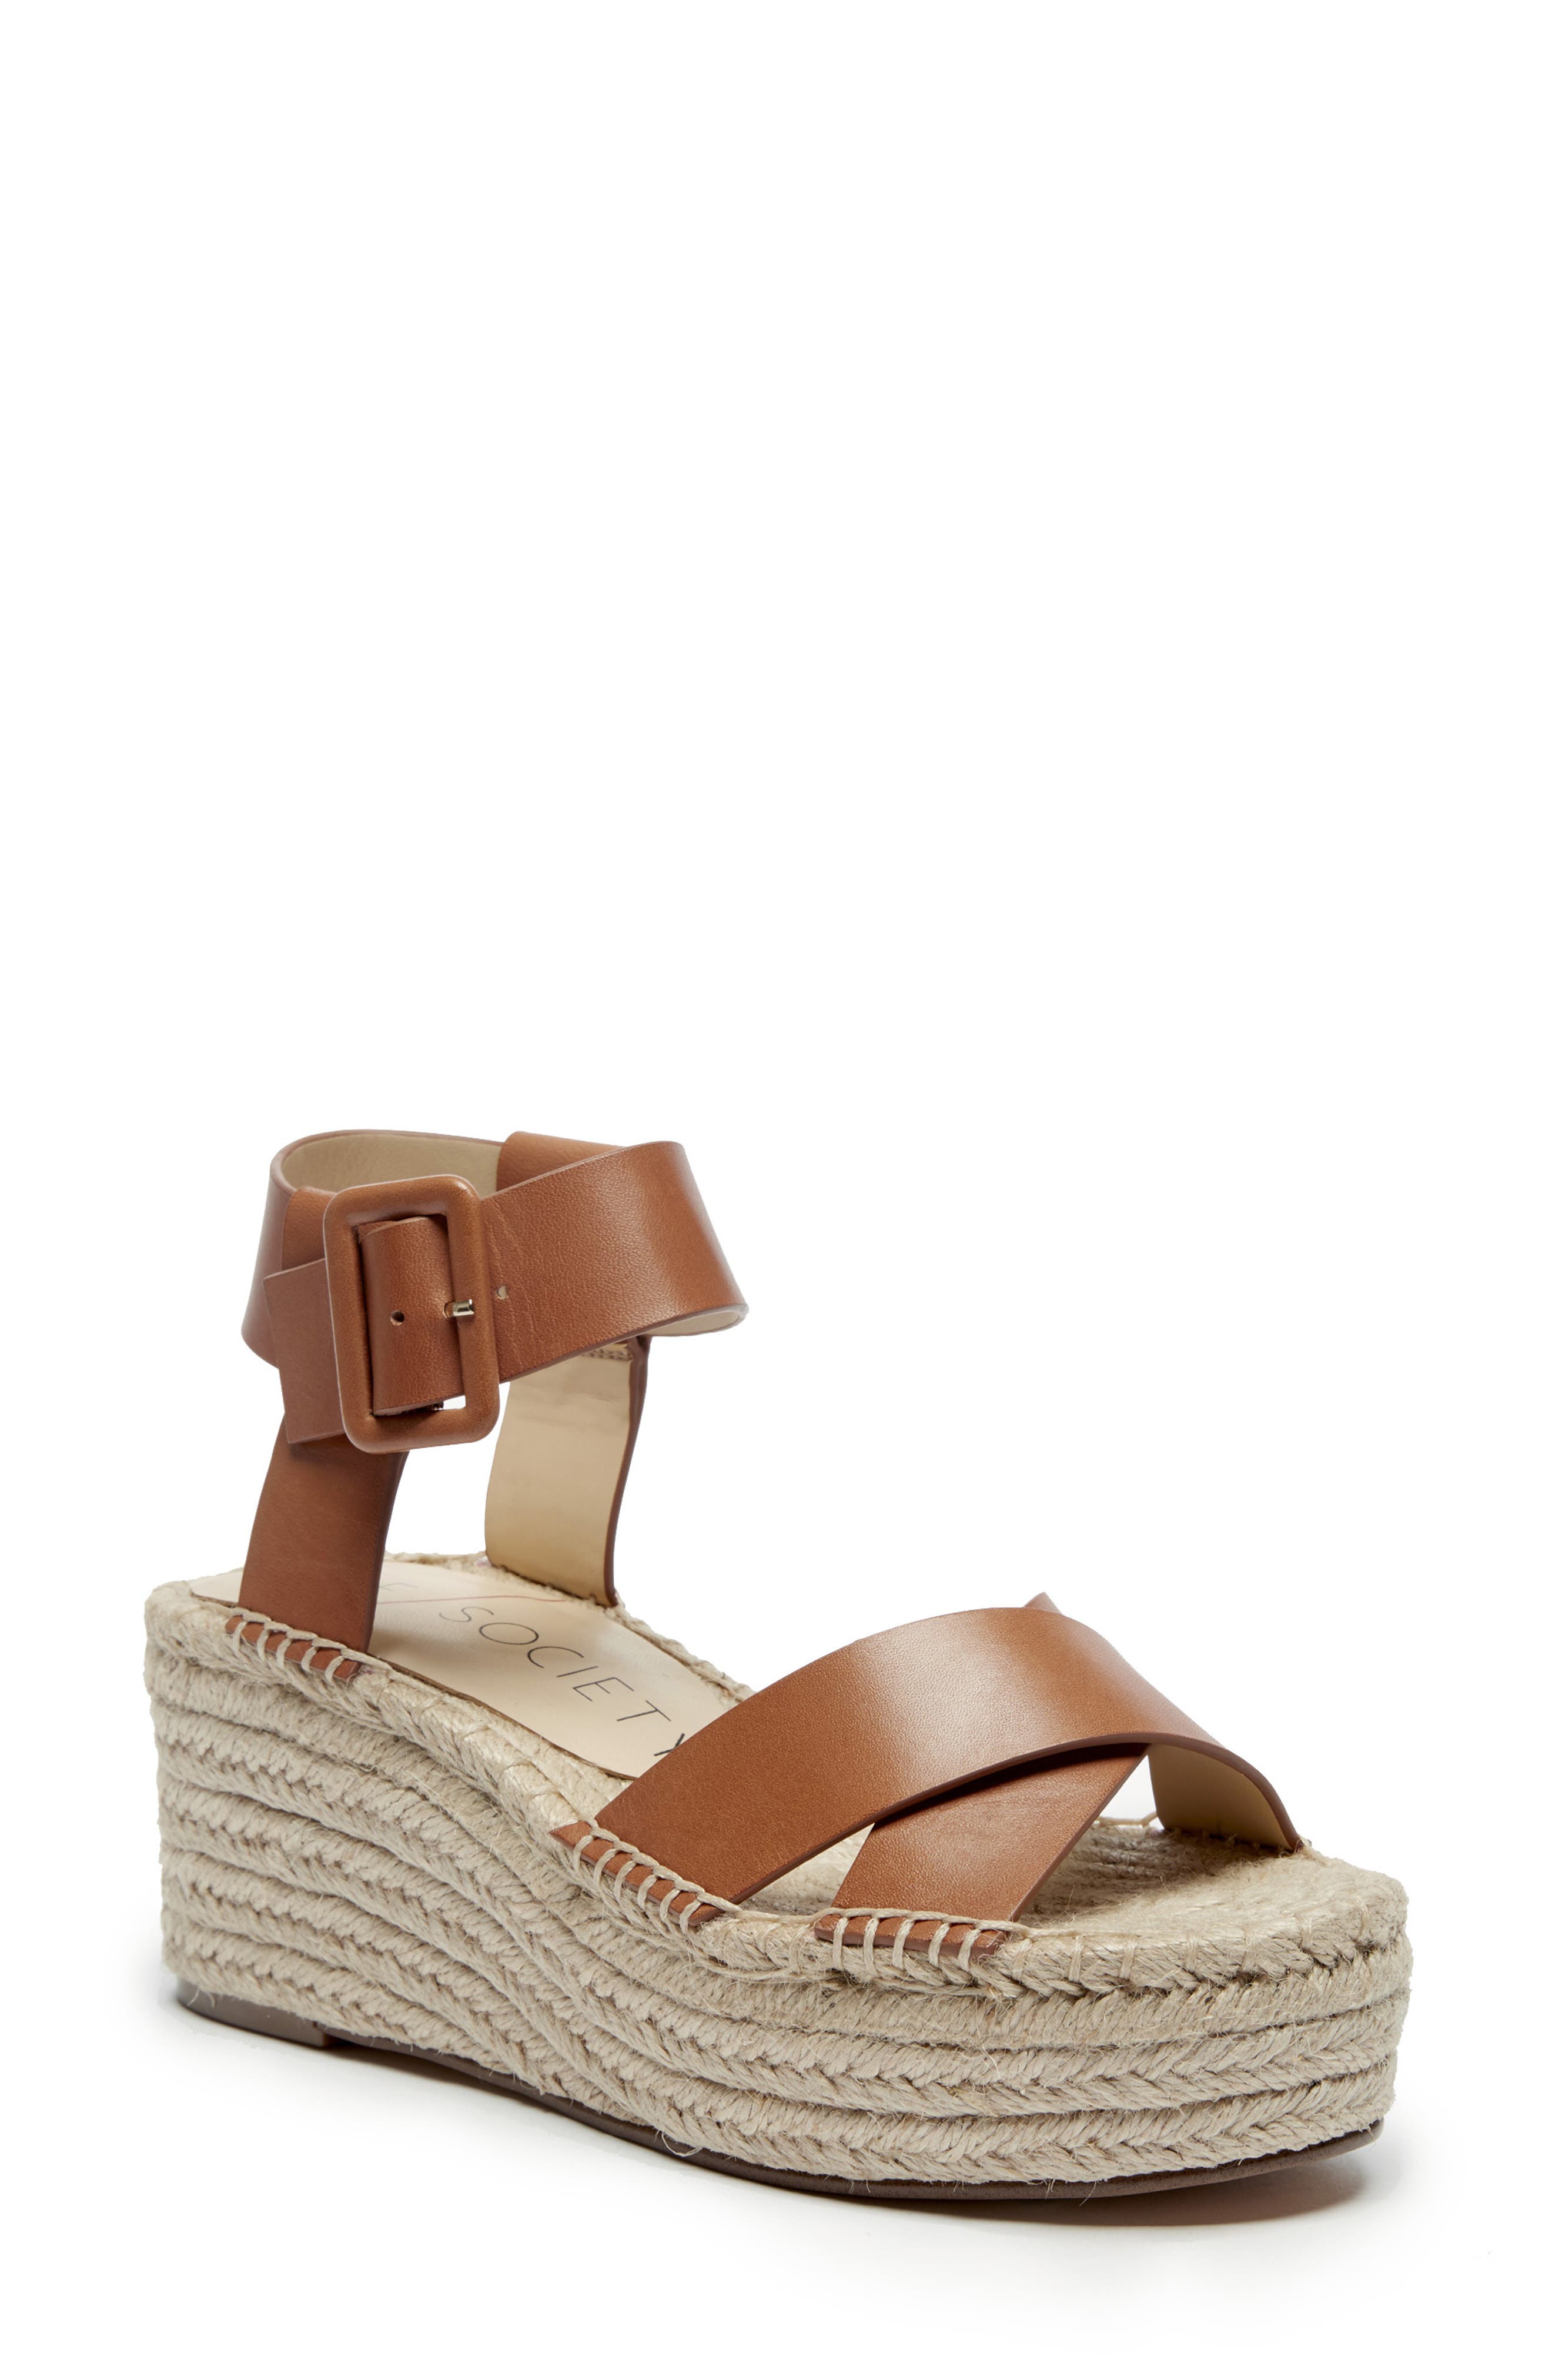 nordstrom women's shoes wedges